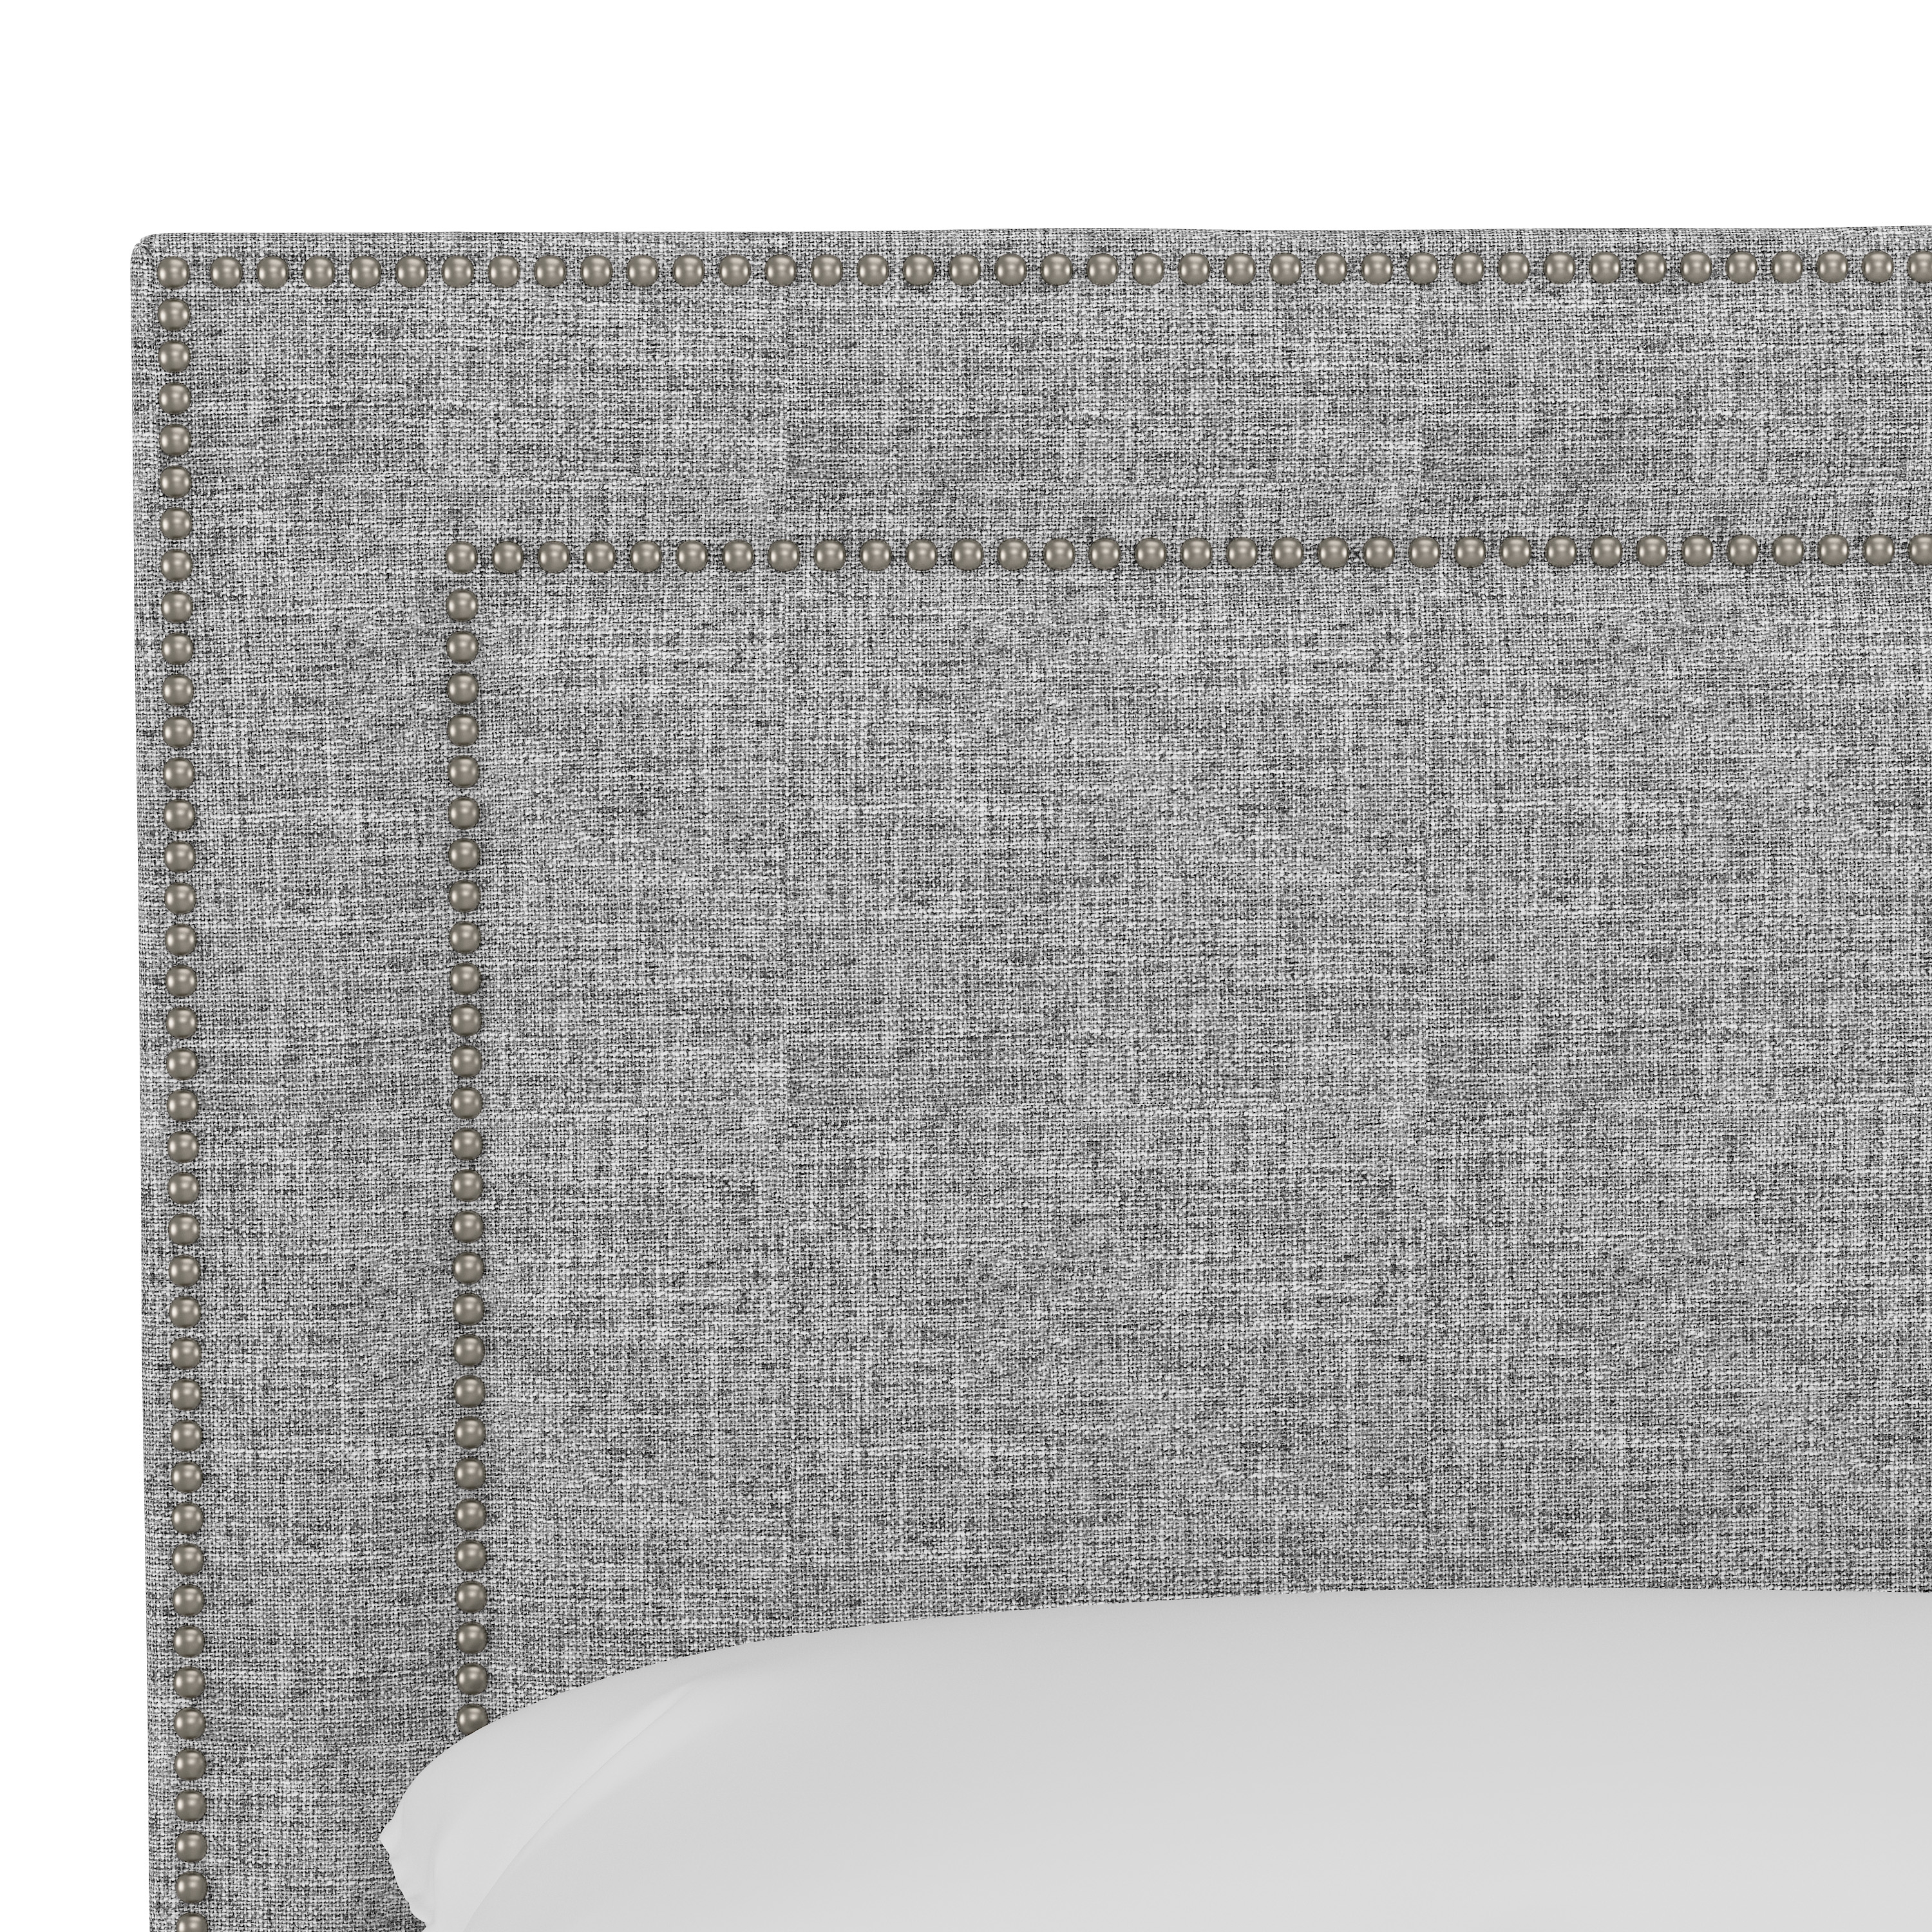 Queen Kimball Headboard, Pewter Nailheads - Image 3